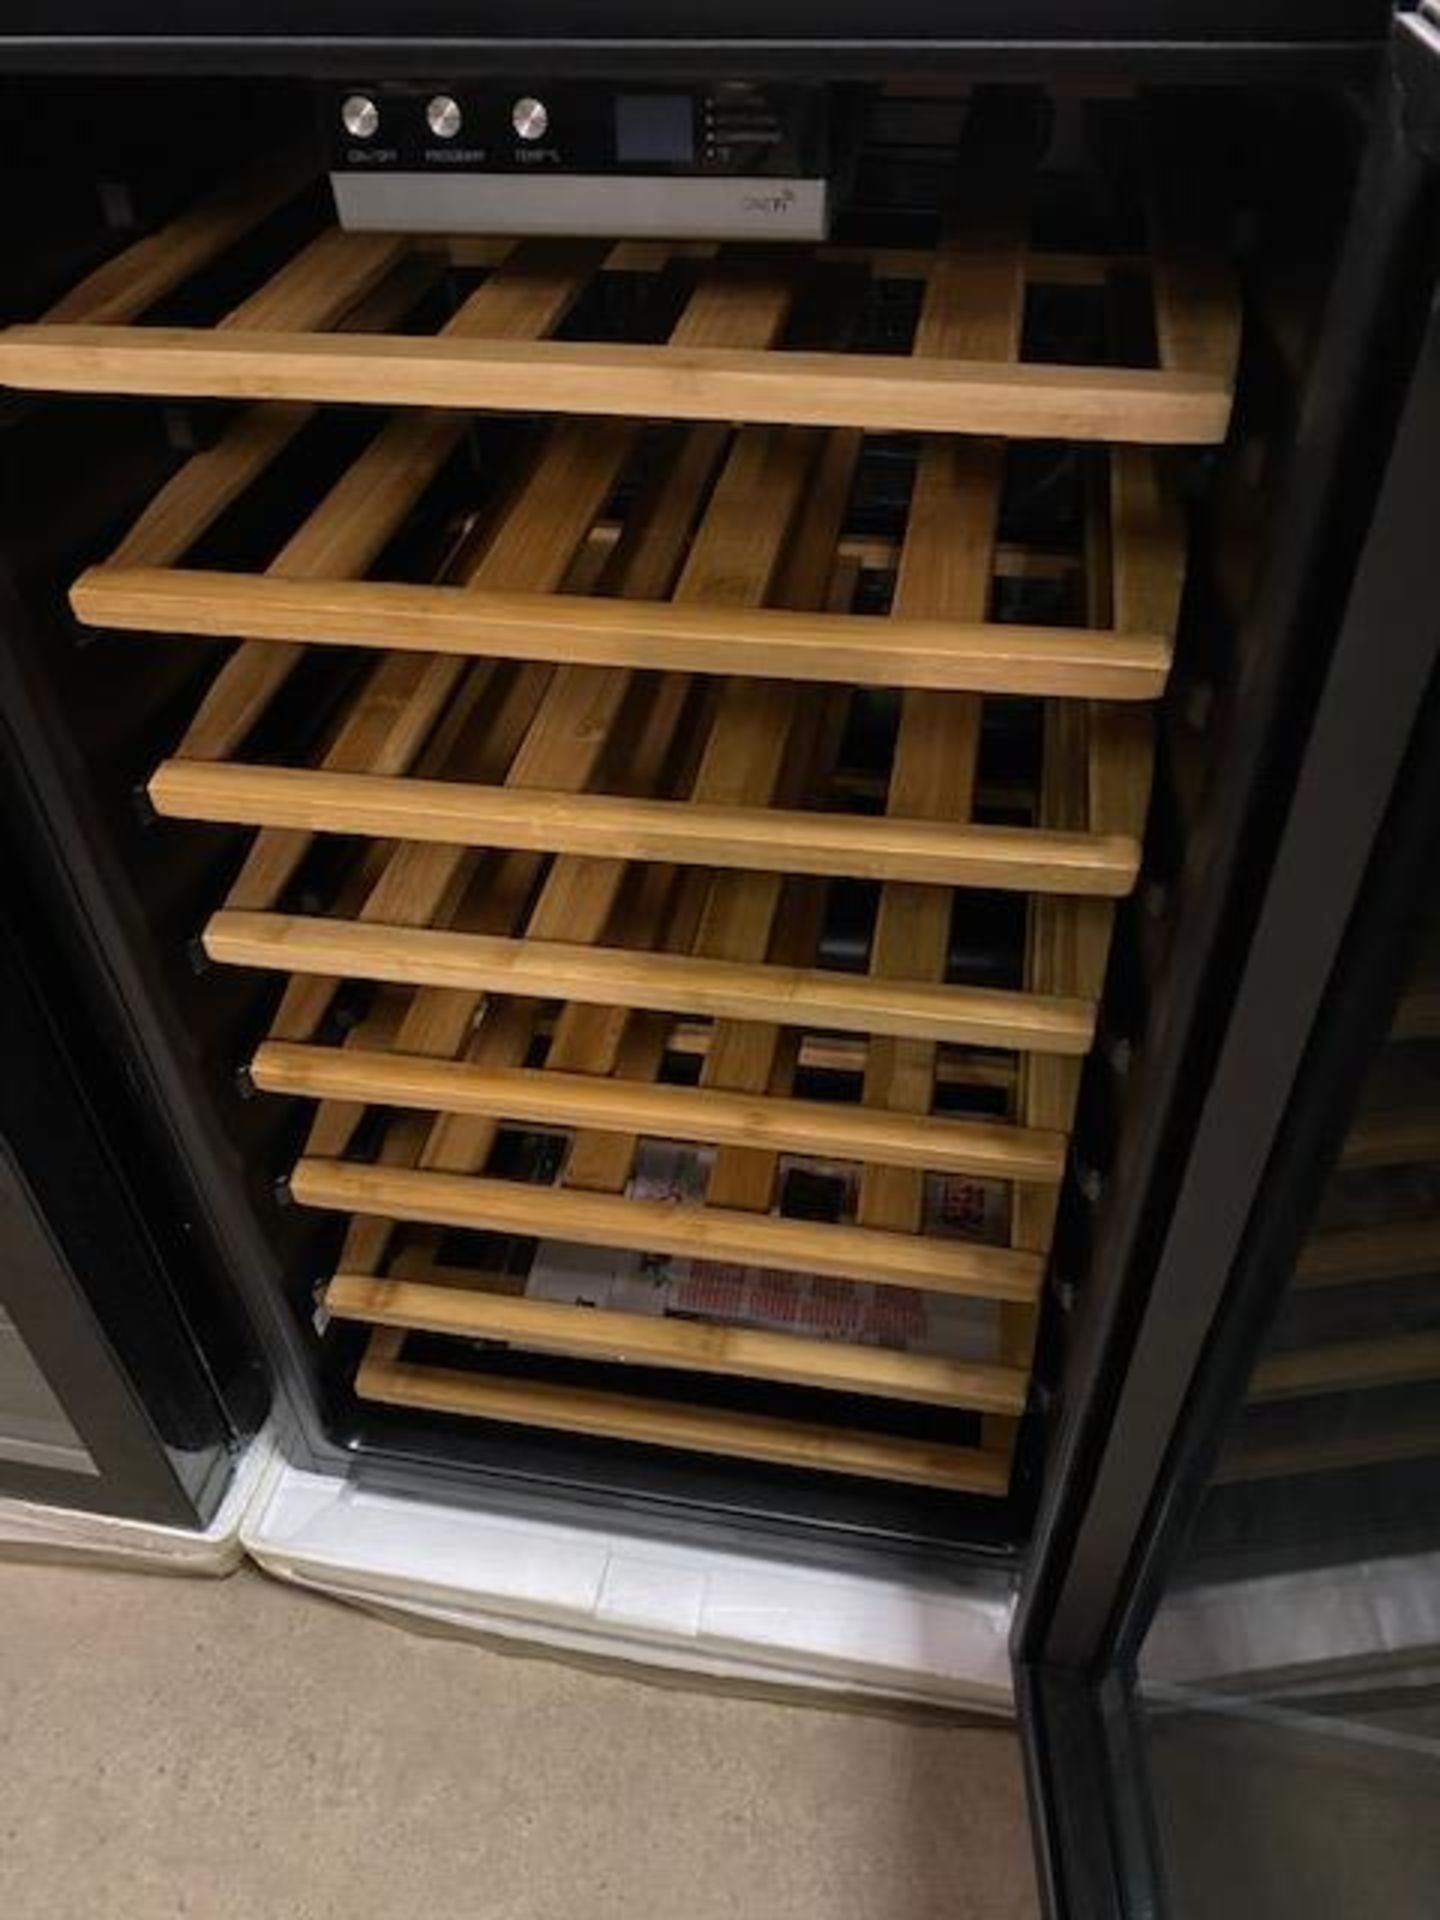 New Wine Fridge, comes boxed, With Wooden Shelves and clear Glass Door